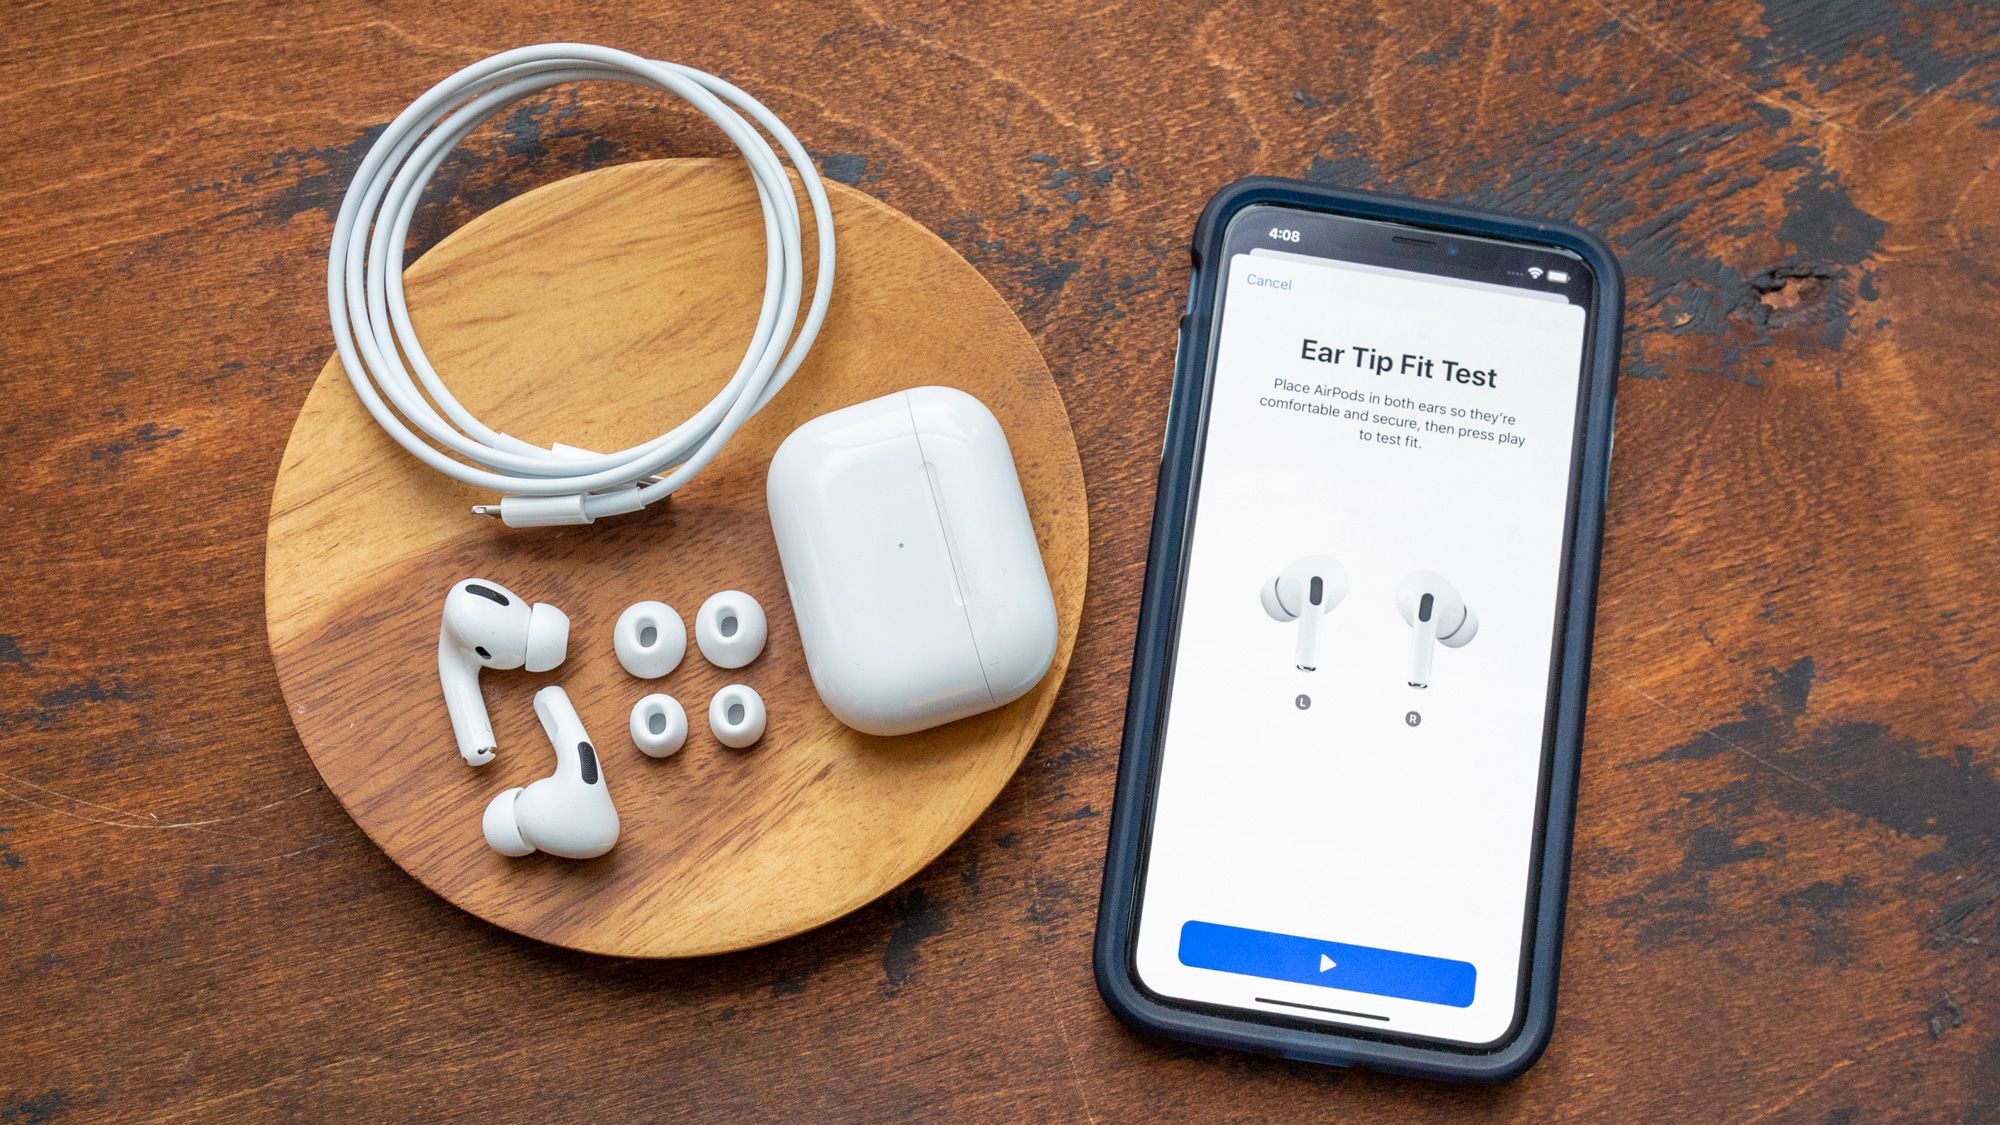 Skur Etablering uudgrundelig How to reset your AirPods and AirPods Pro | Laptop Mag